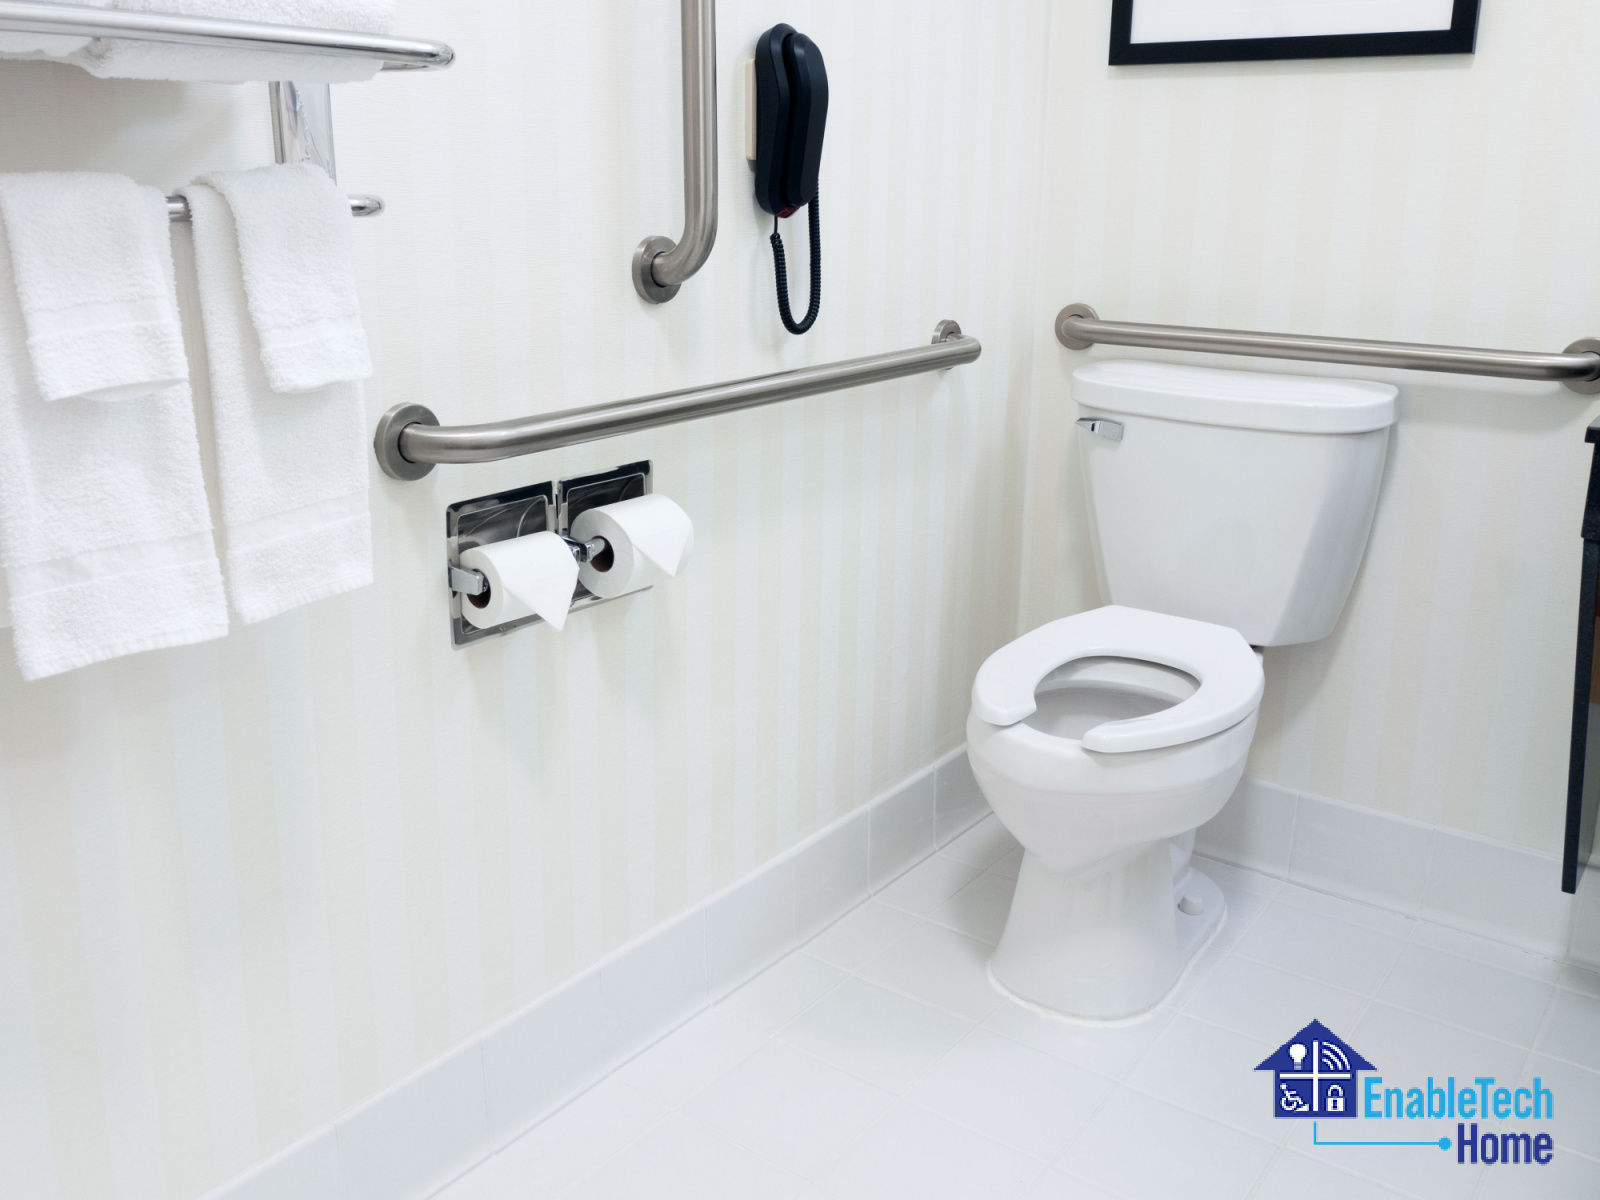 Adding Safety and Independence with Grab Bar Installation for Your Loved One